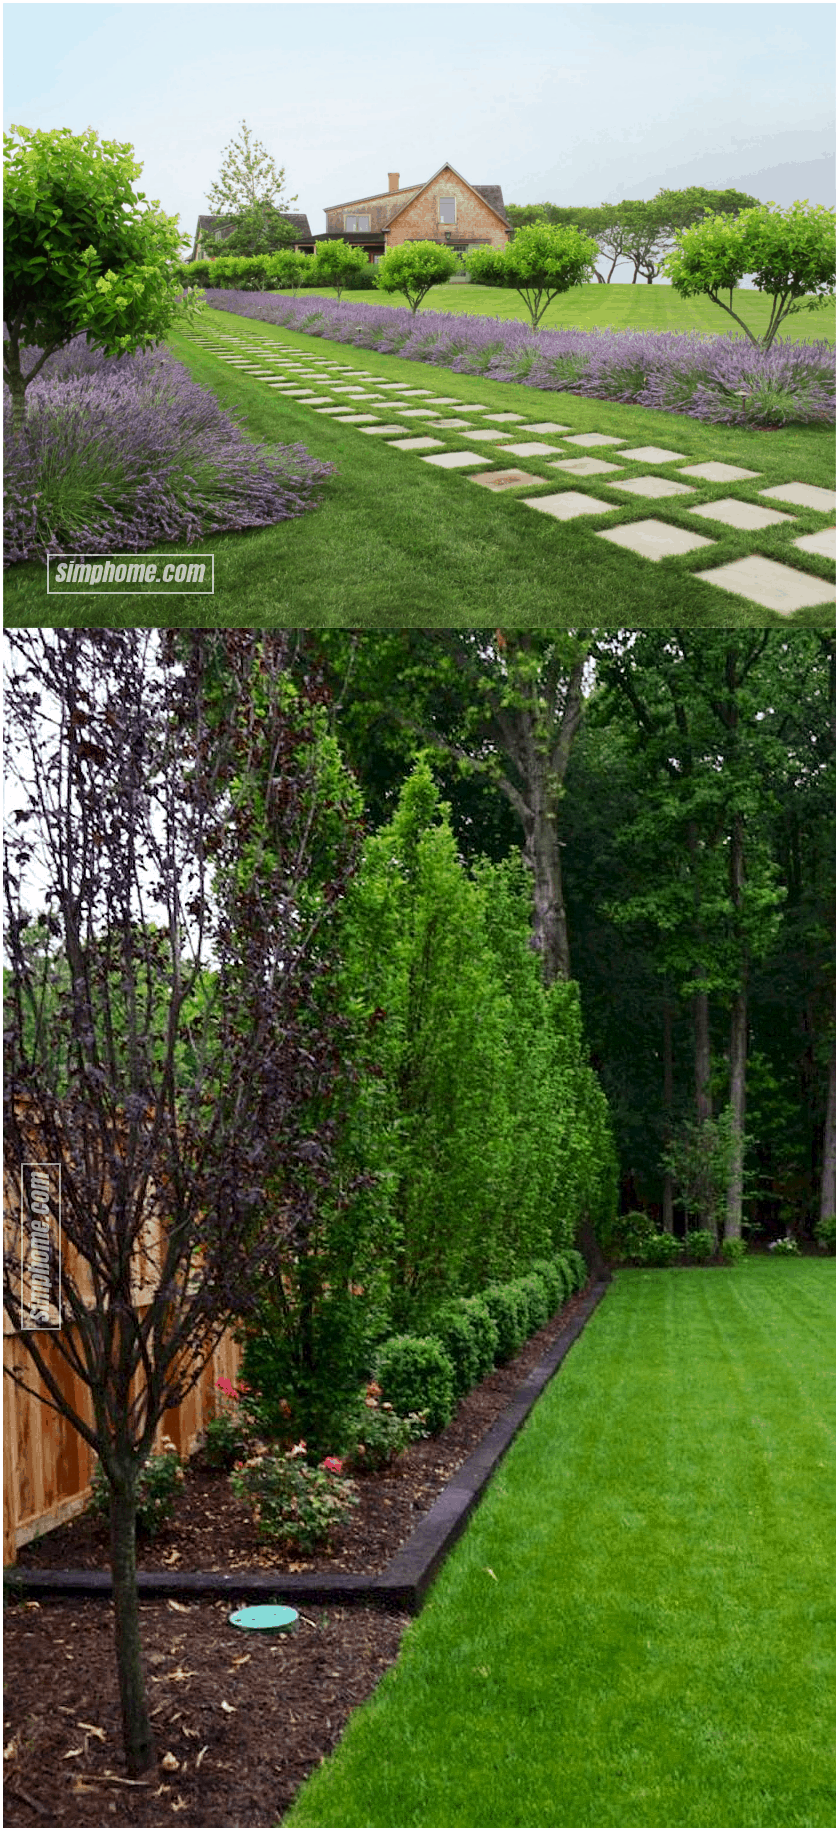 20.SIMPHOME.COM beautiful landscaping ideas and backyard privacy fence landscaping ideas on a budget